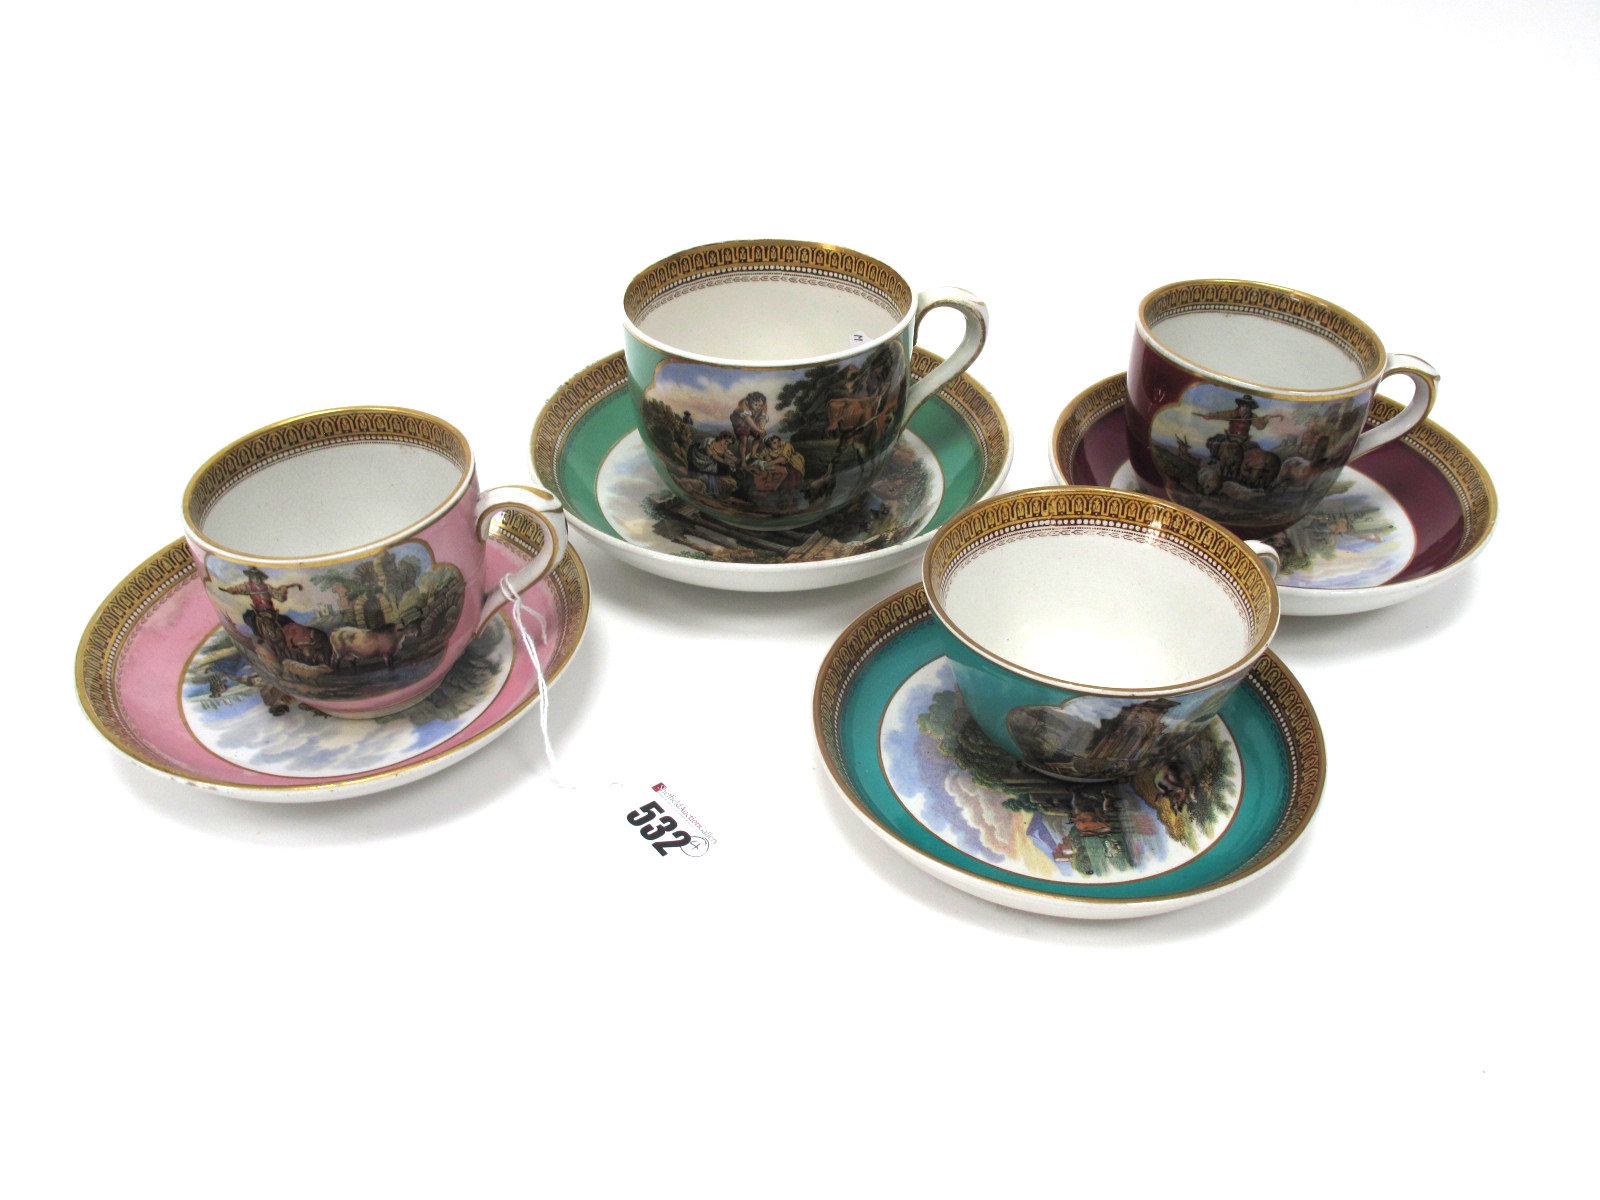 Four Mid XIX Century Prattware Teacups and Saucers, decorated with printed scenes within a gilt